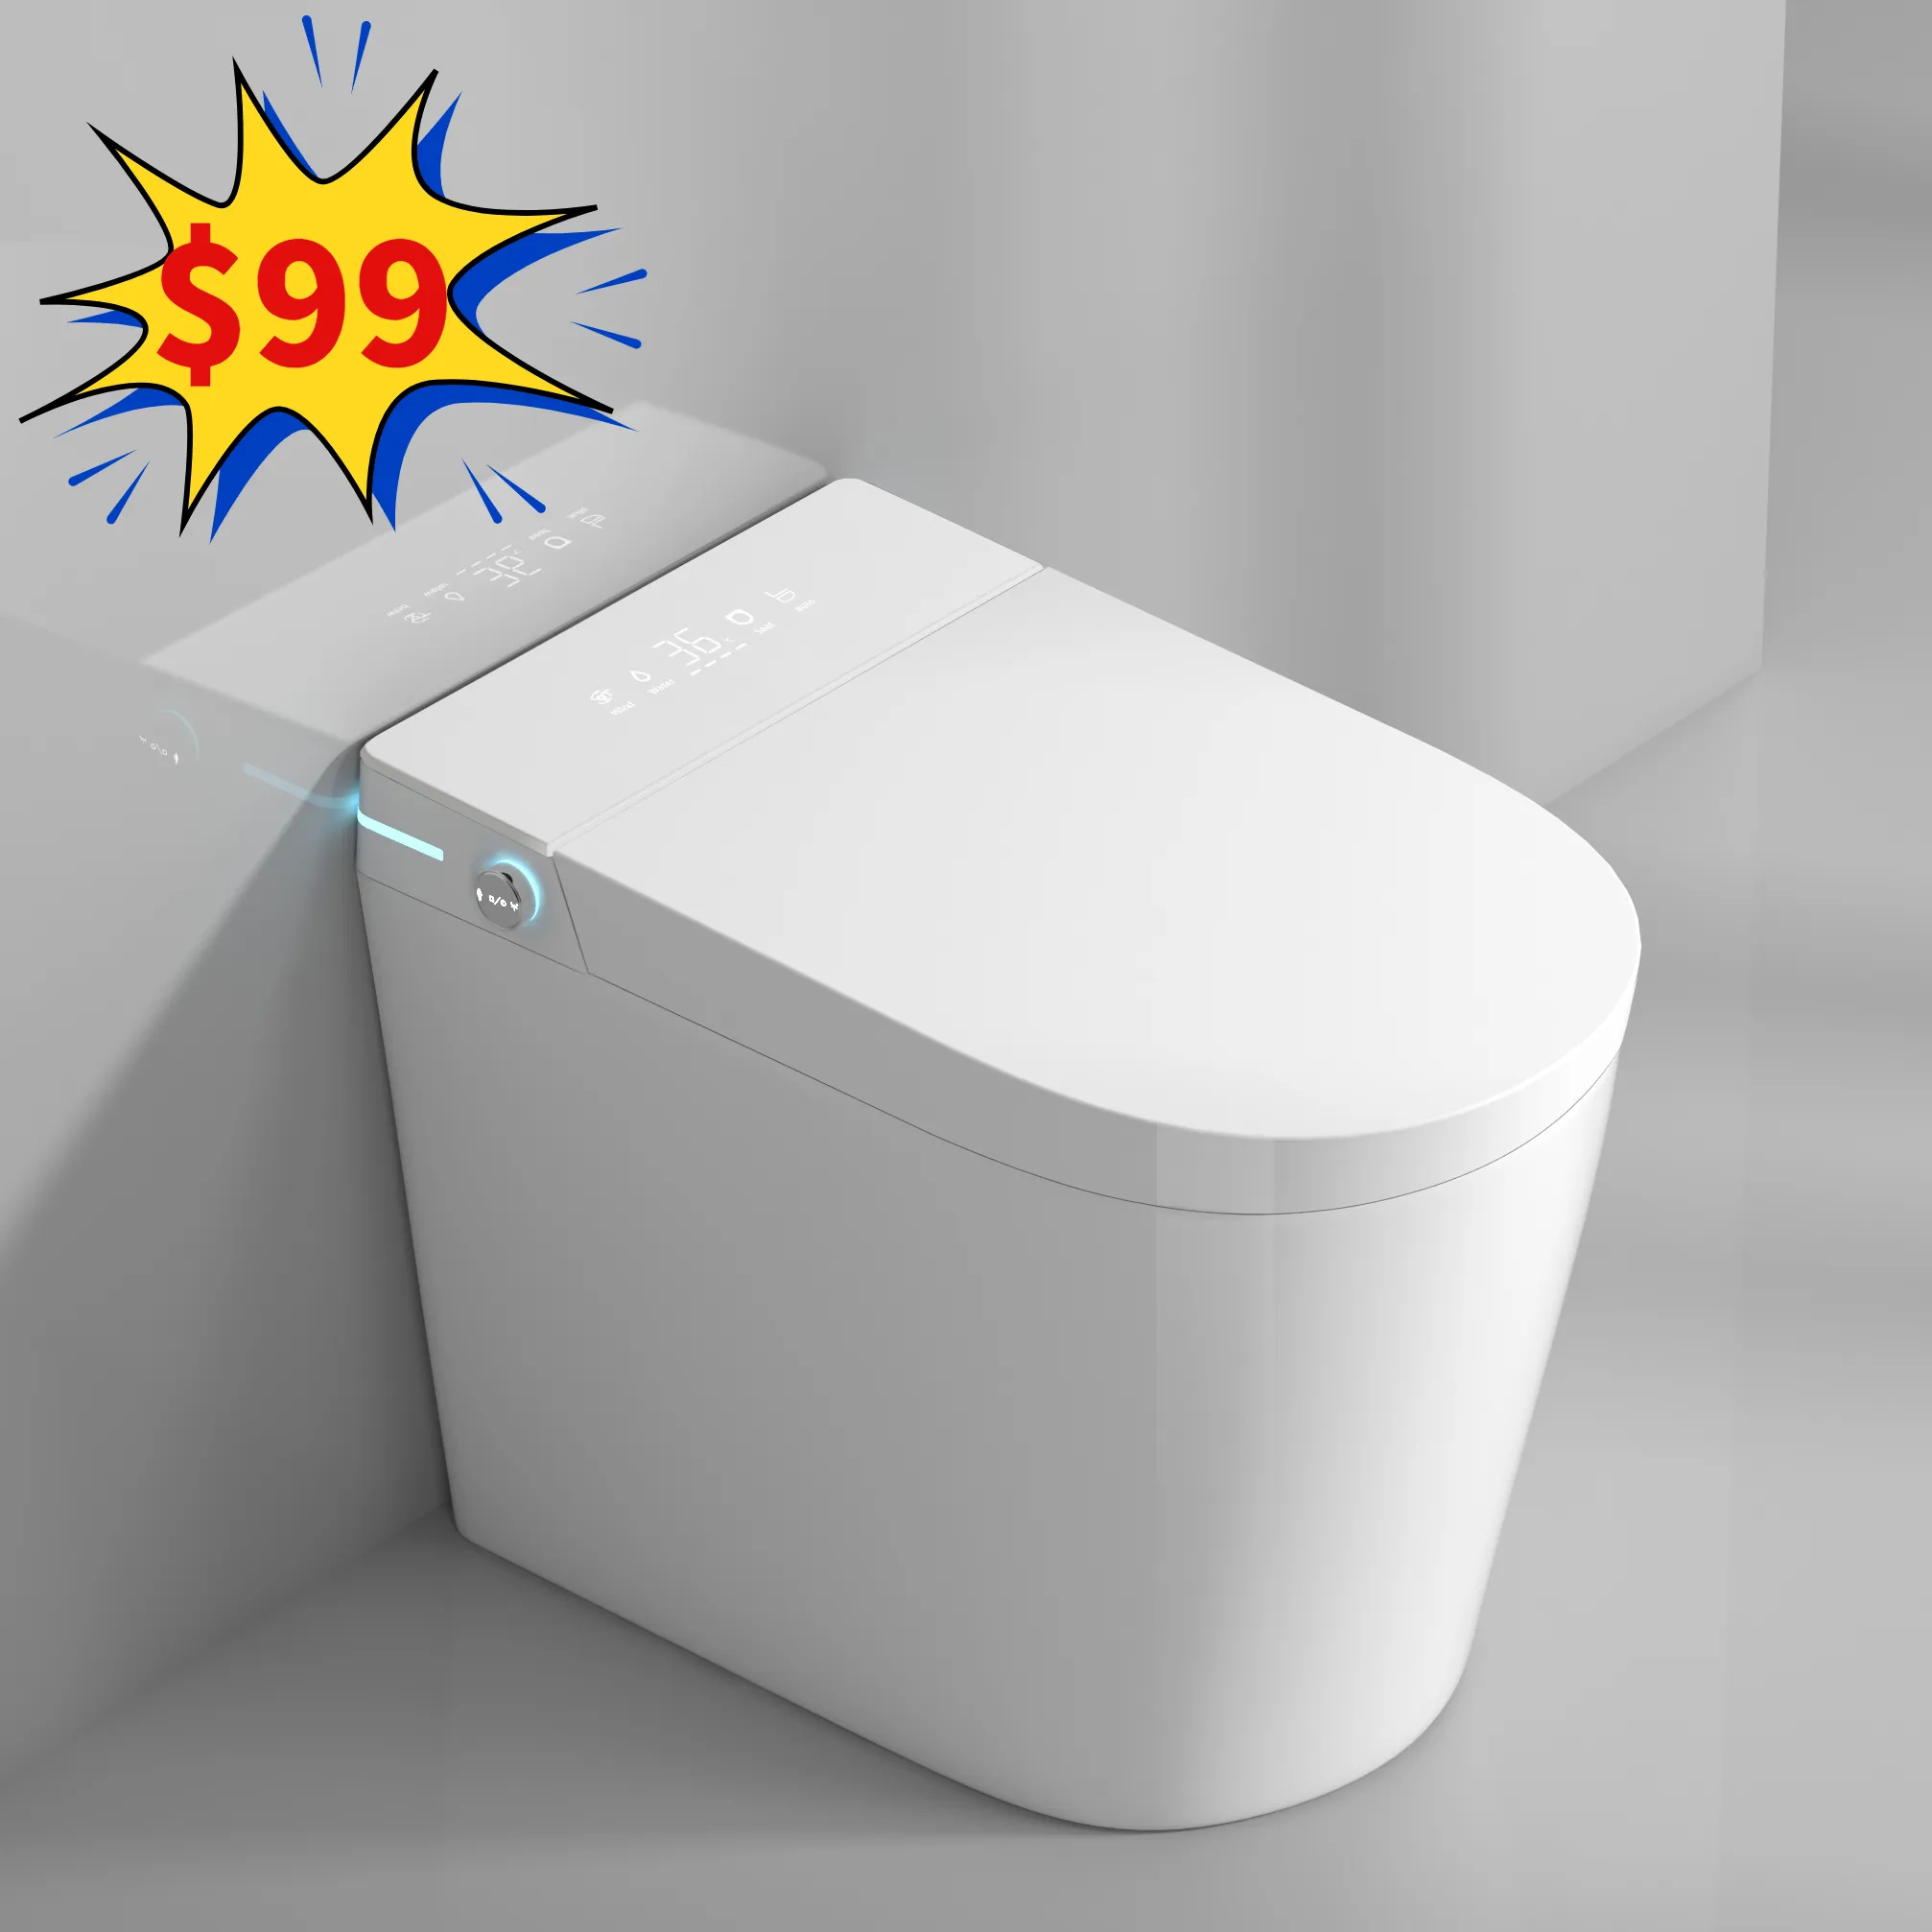 Top Sale Intelligent WC Save Space Small Size Sanitary Ware Water Closet Automatic Toilet Bowl Bathroom Ceramic Smart Toilet